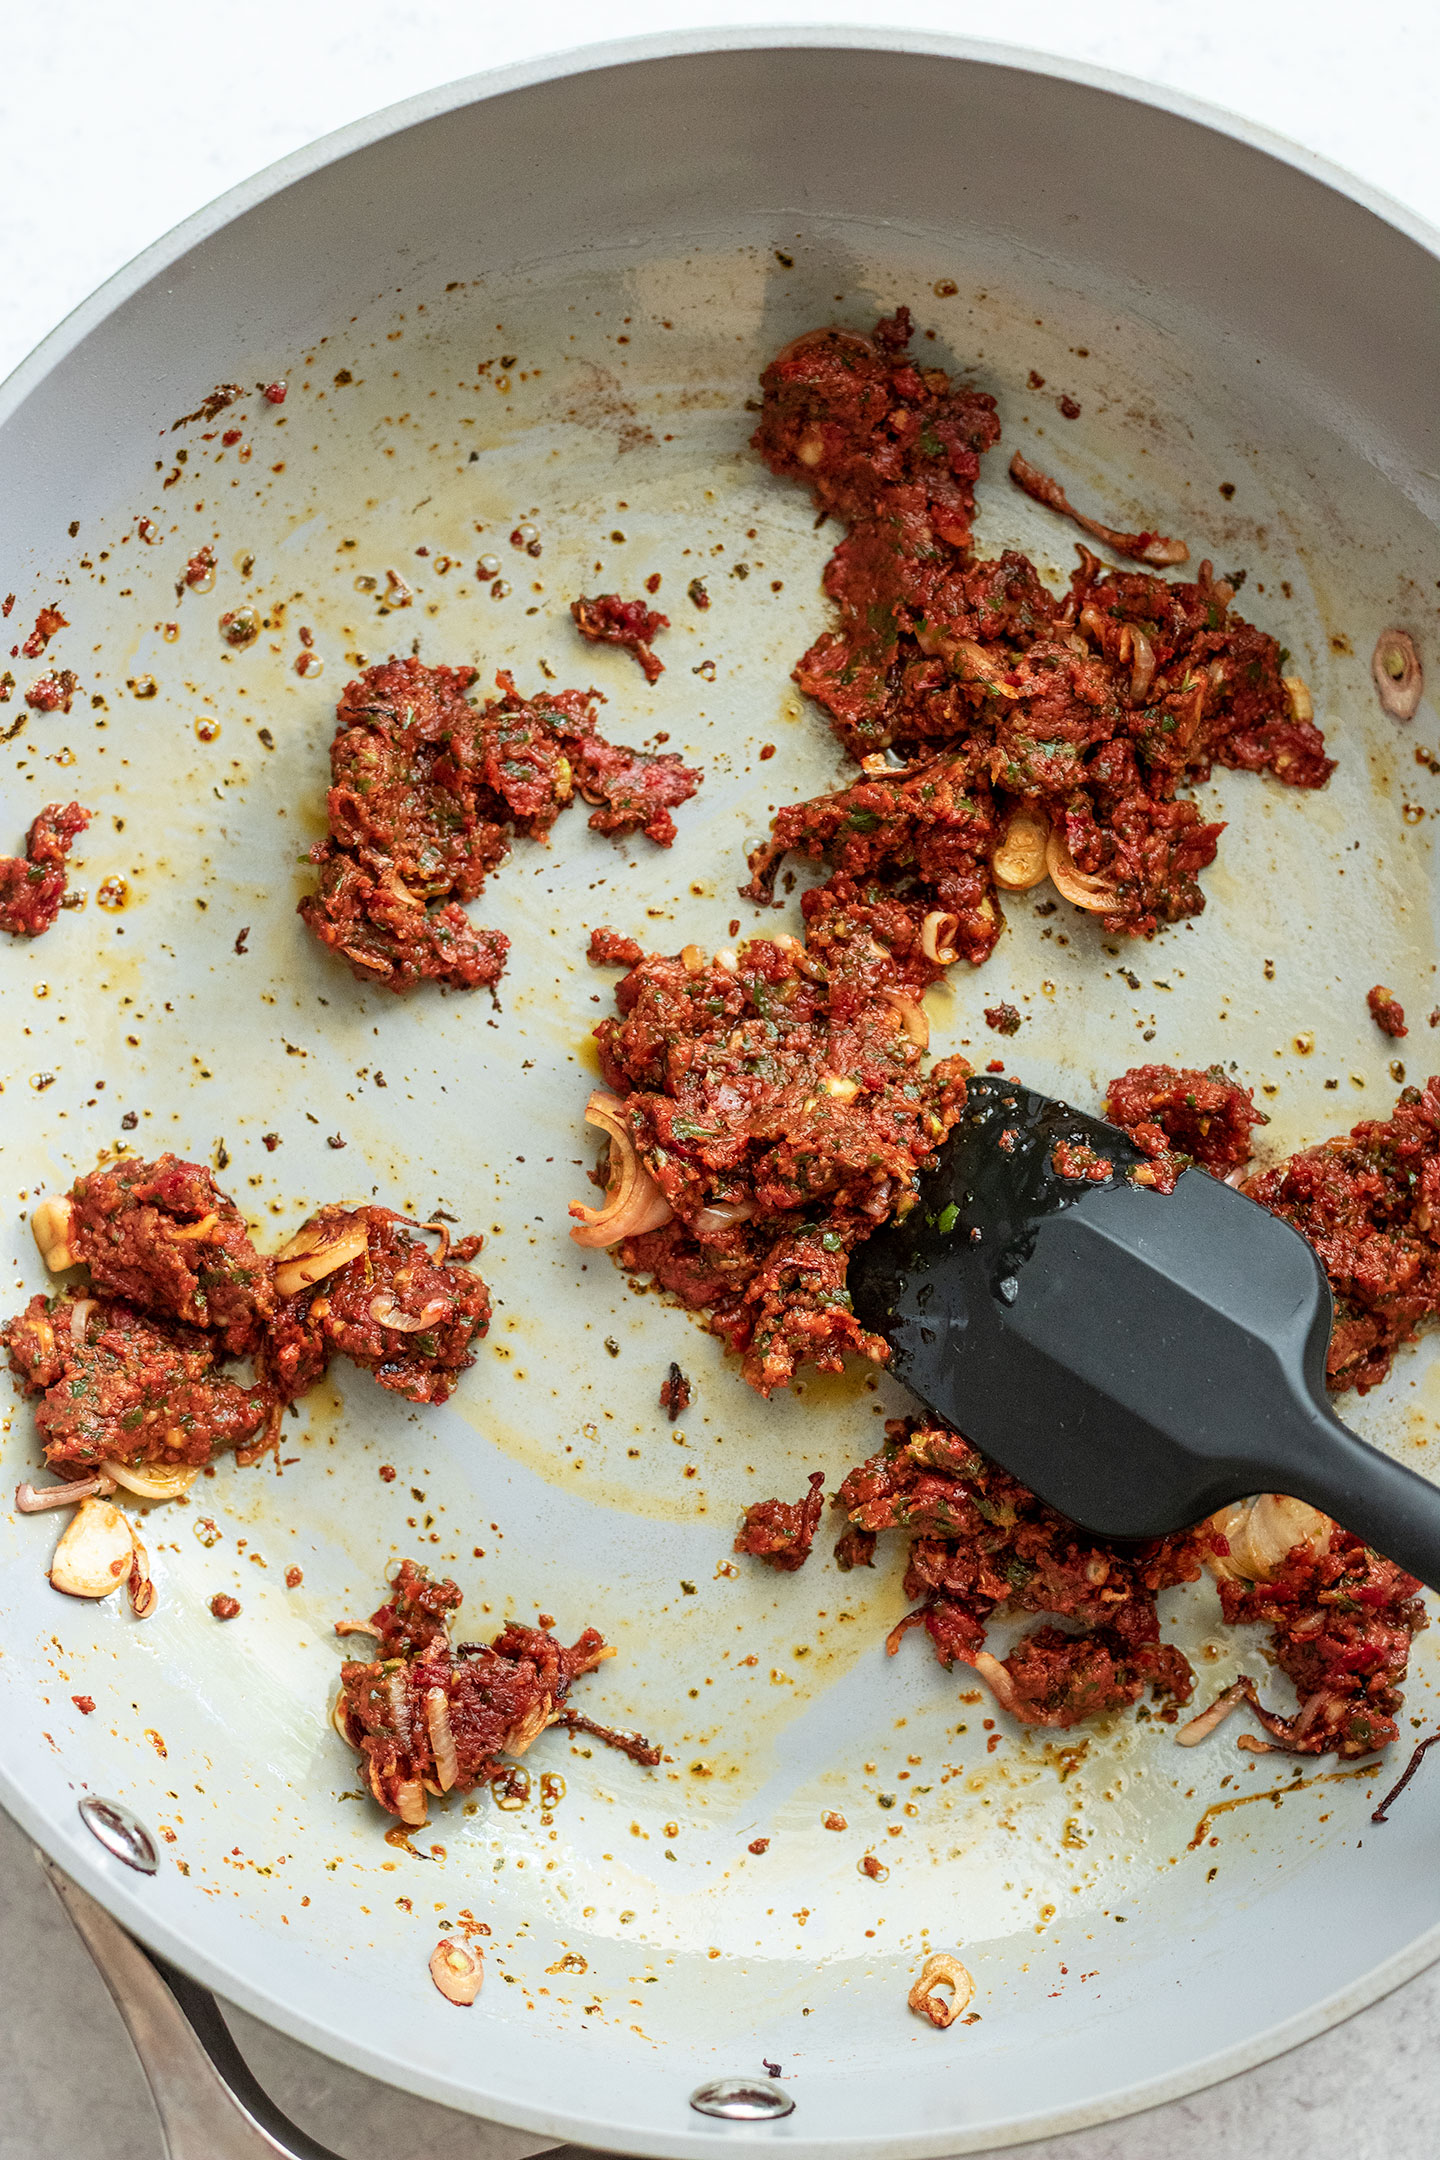 Sautéing red pesto with shallots and garlic in a pan.